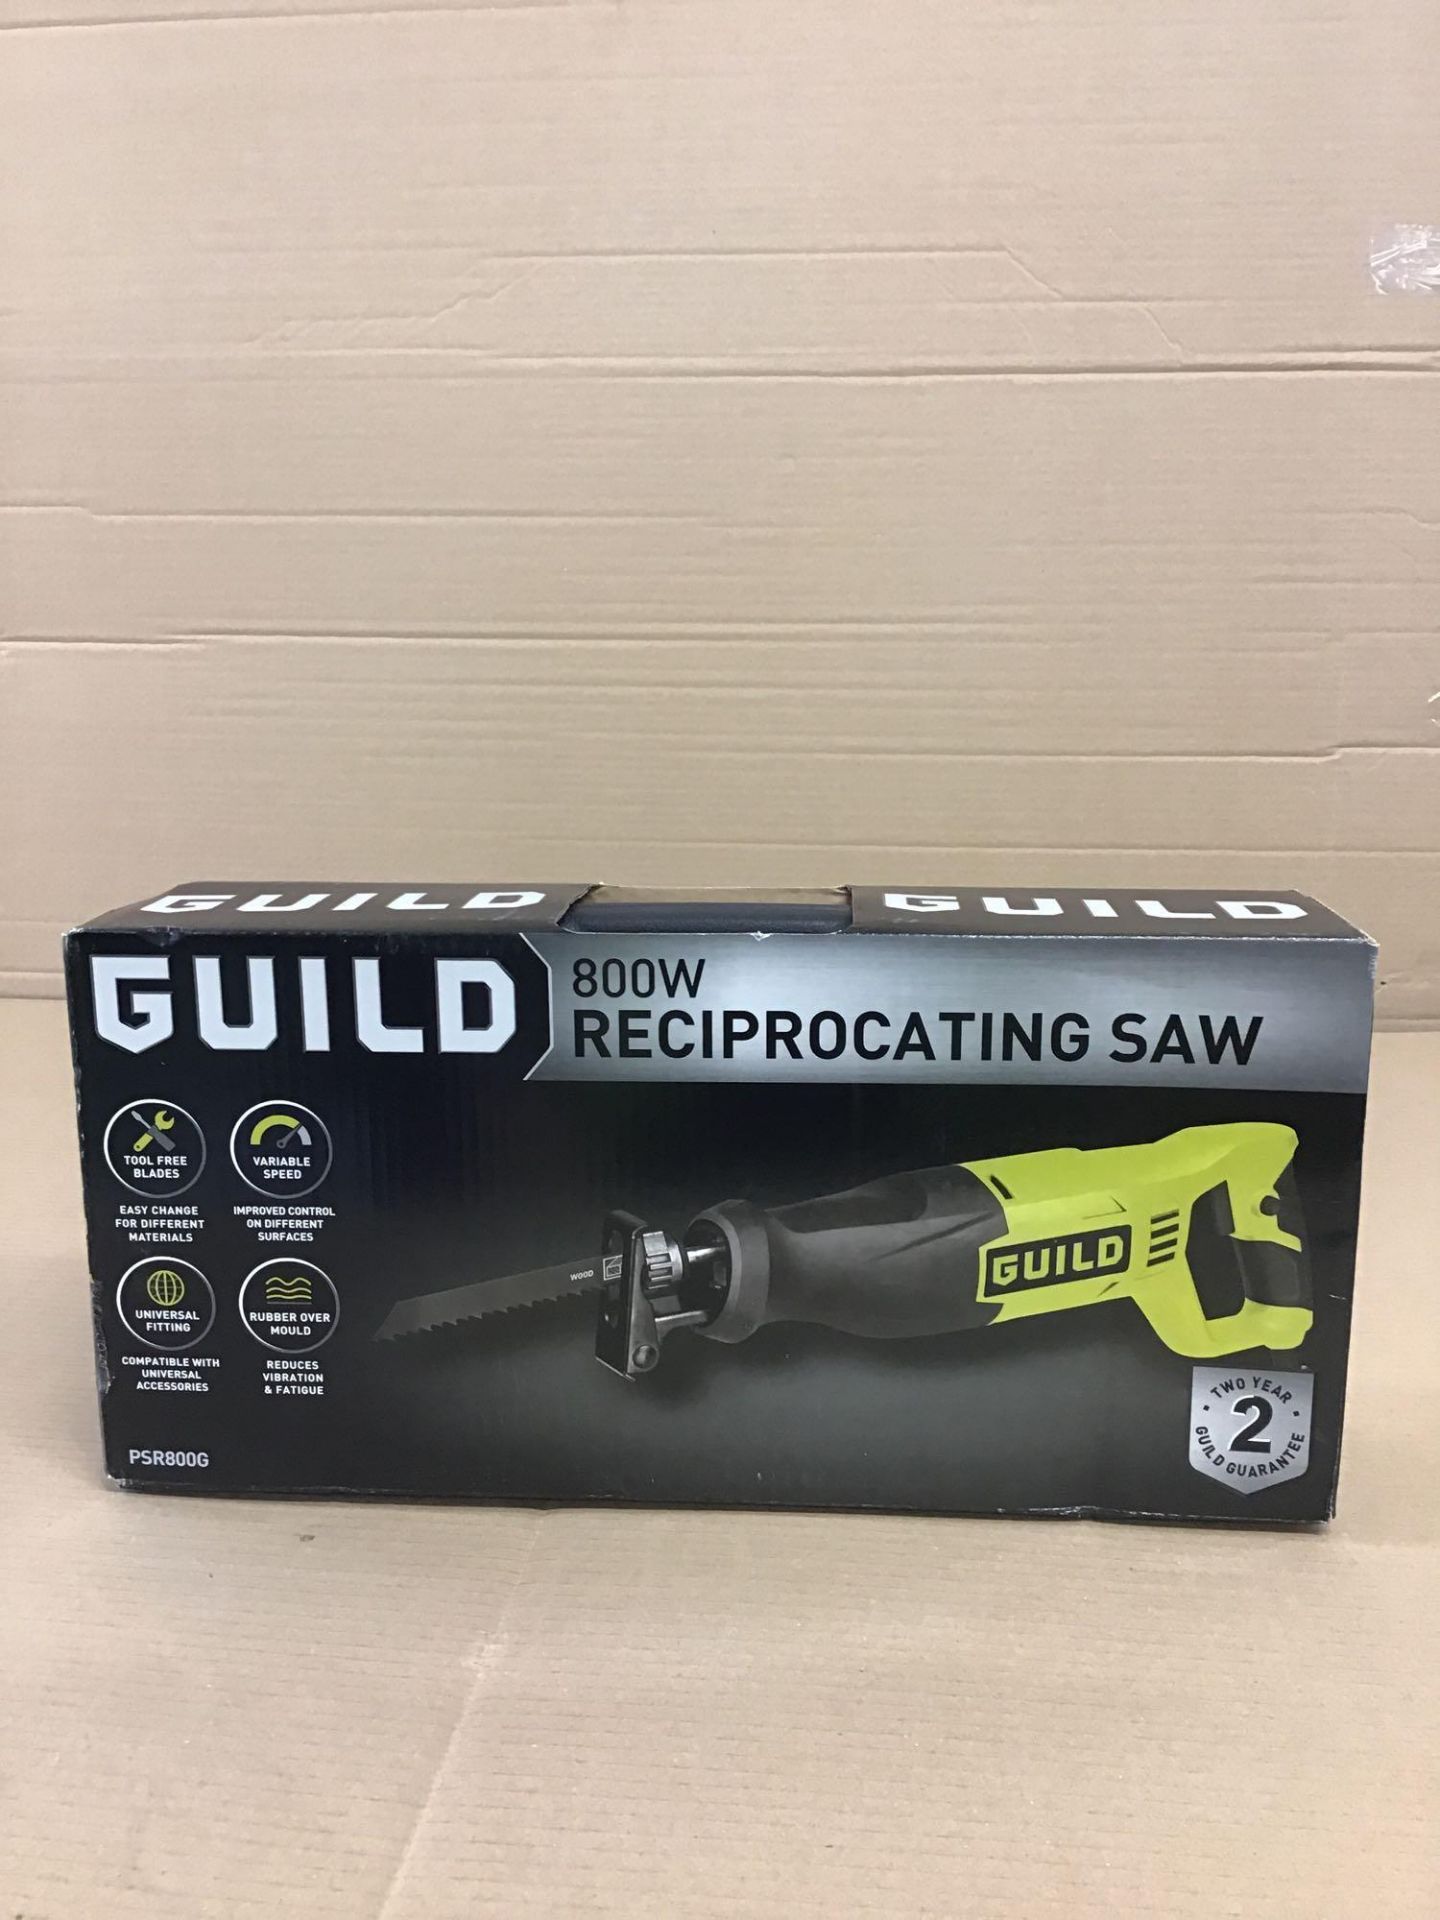 Guild Reciprocating Saw - 800W (481/3011) - £50.00 RRP - Image 3 of 5